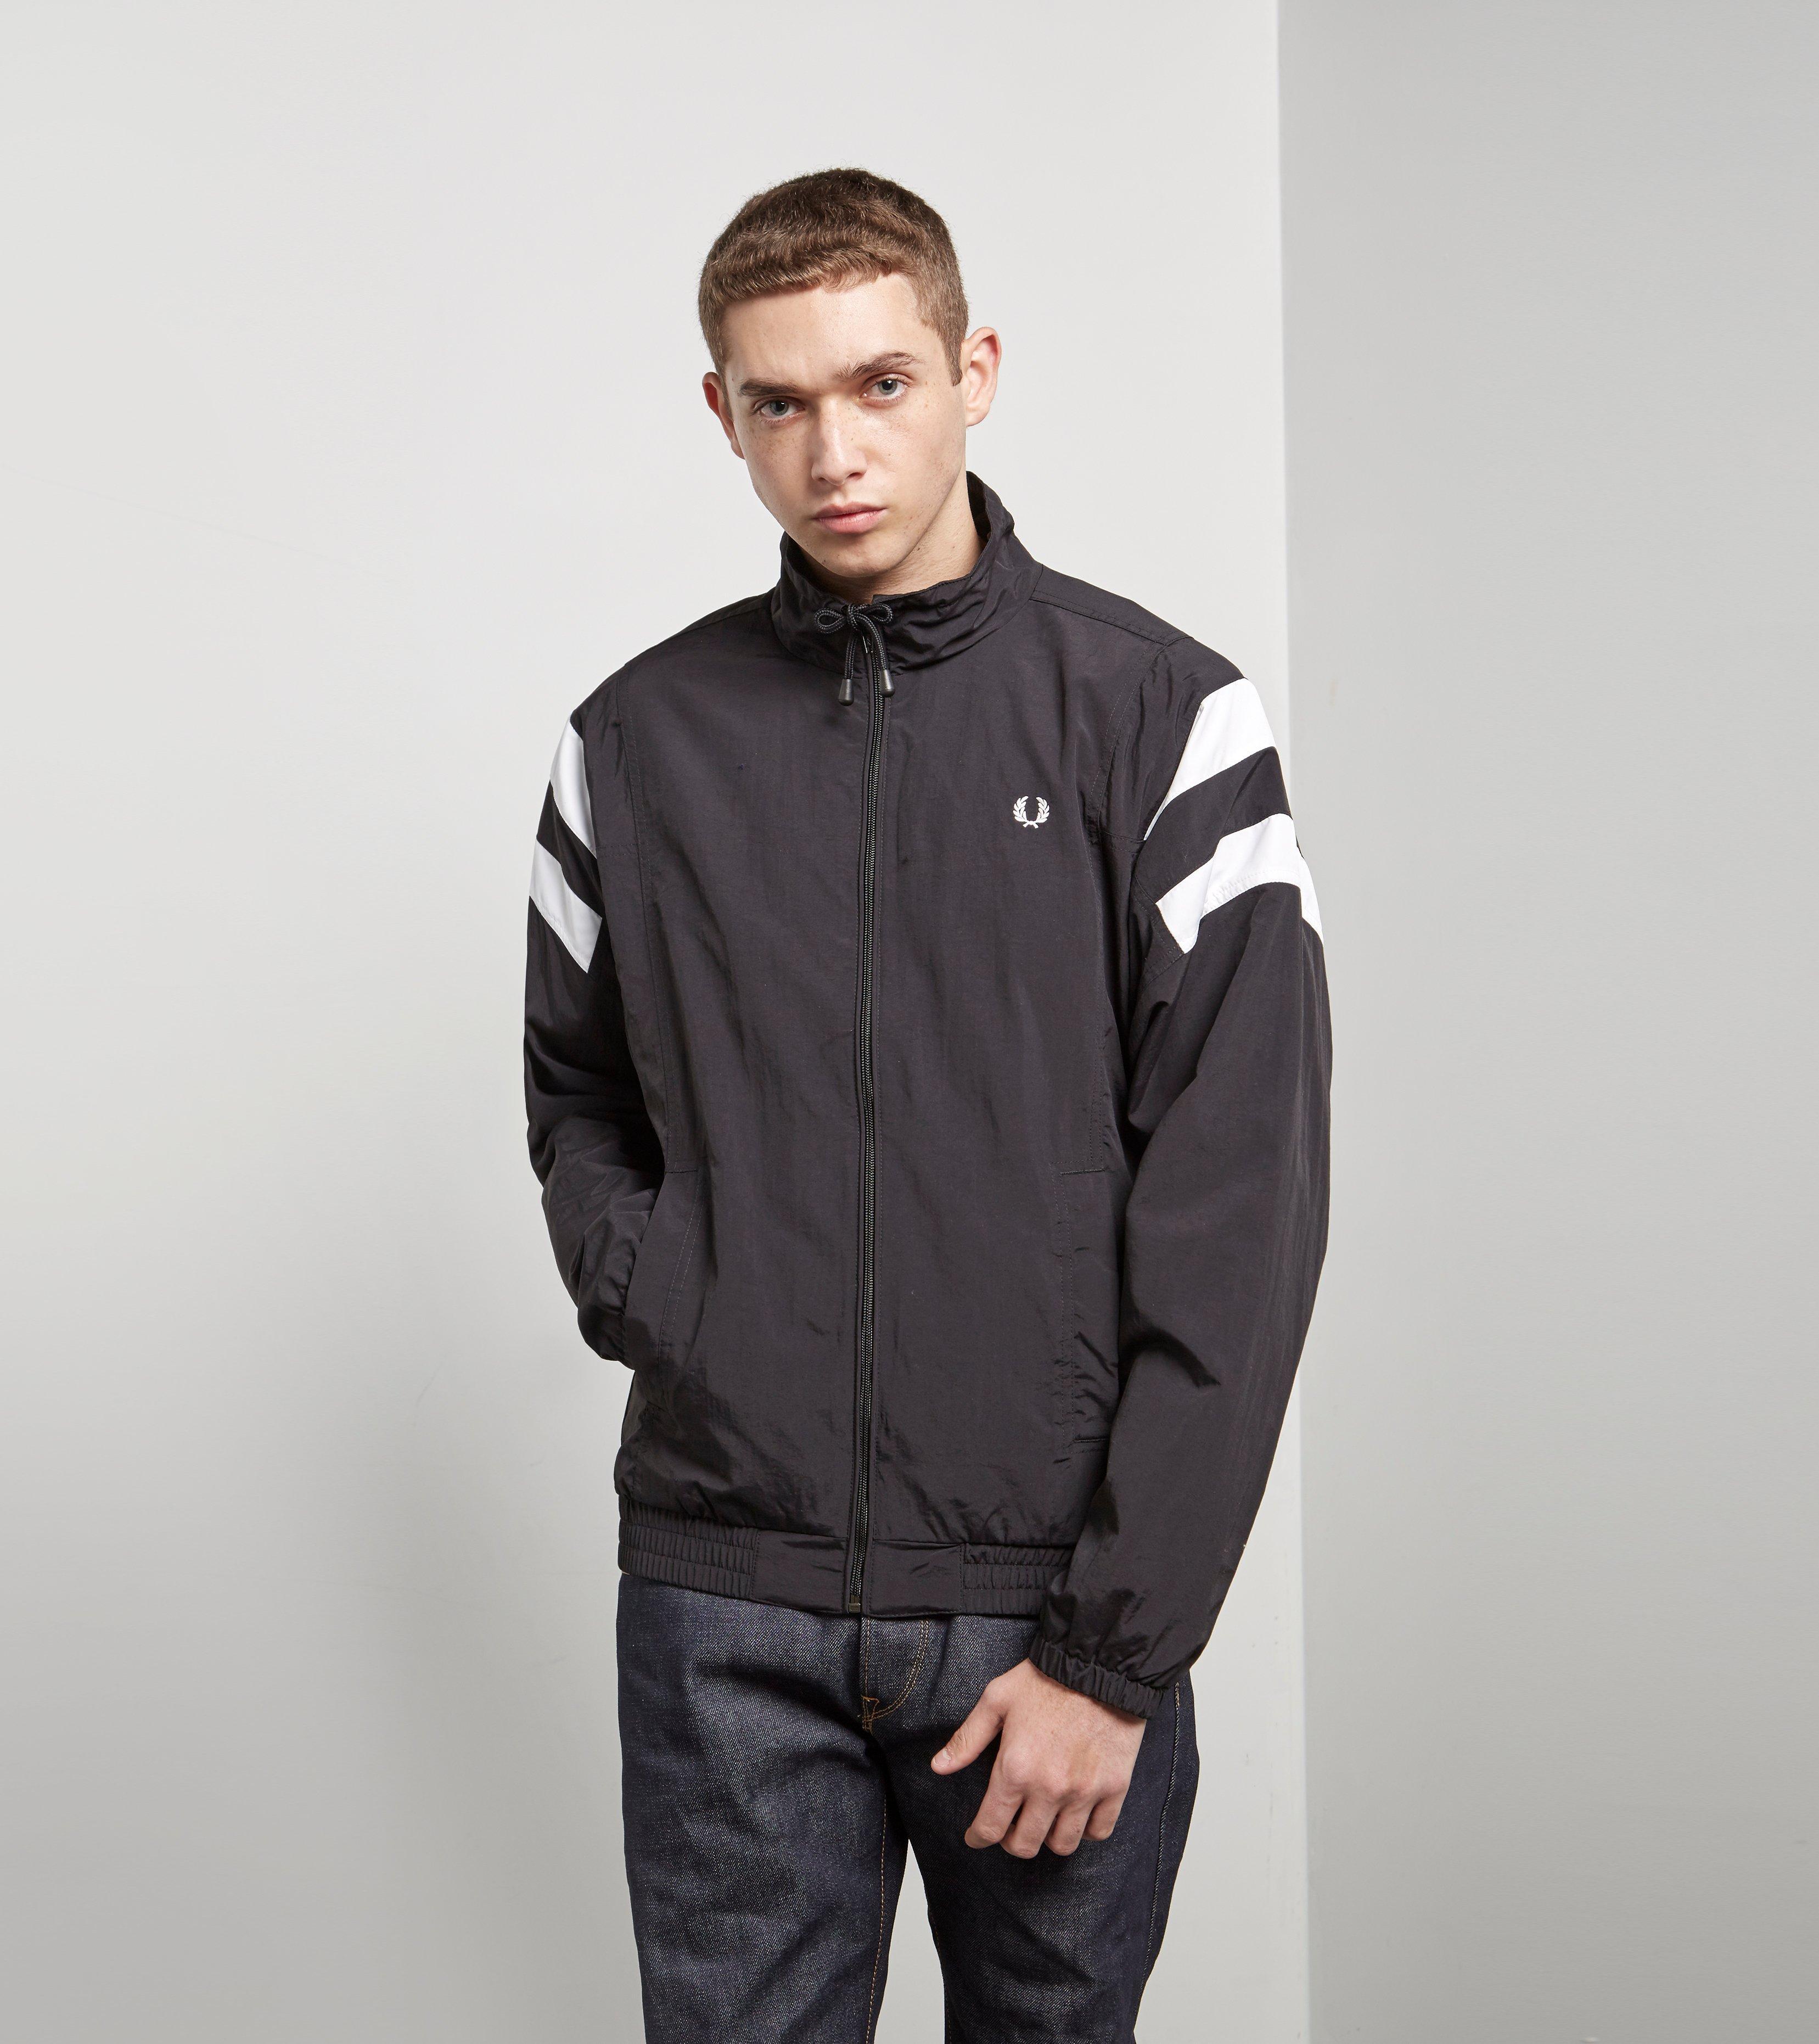 Lyst - Fred Perry Mono Tennis Jacket in Black for Men